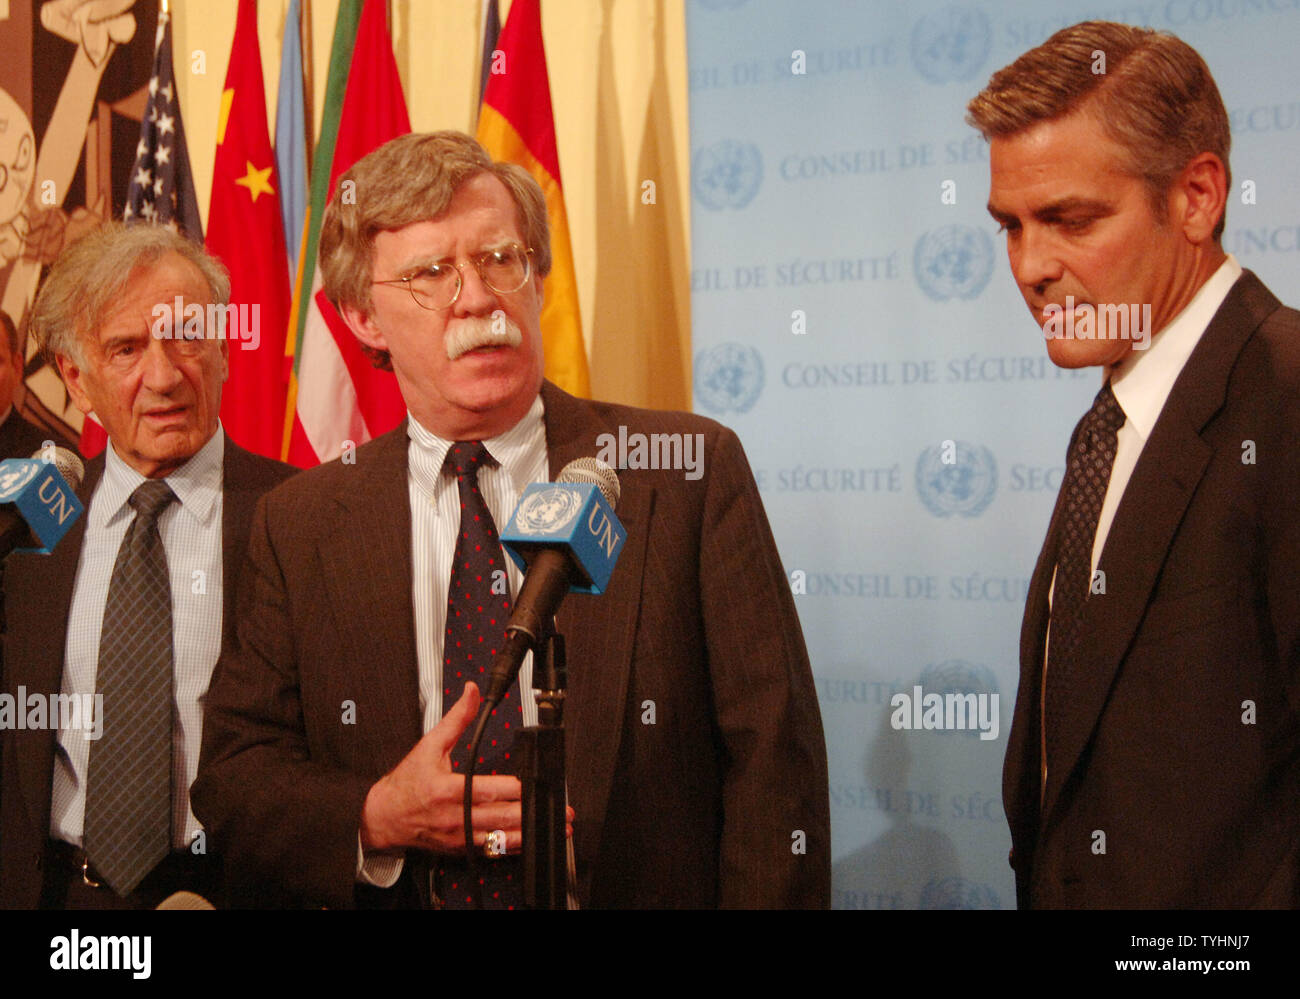 Nobel Peace Prize winner Dr. Elie Wiesel ,a US Ambassador to UN John Bolton and actor/producer George Clooney (left to right) meet the UN media after a 'Arria' style meeting of the United Nations Security Council members on the subject of Dafur, Sudan on September 14, 2006 in New York. The meeting was called for by the U.S. Mission to the UN and the Elie Wiesel Foundation.   (UPI Photo/Ezio Petersen) Stock Photo